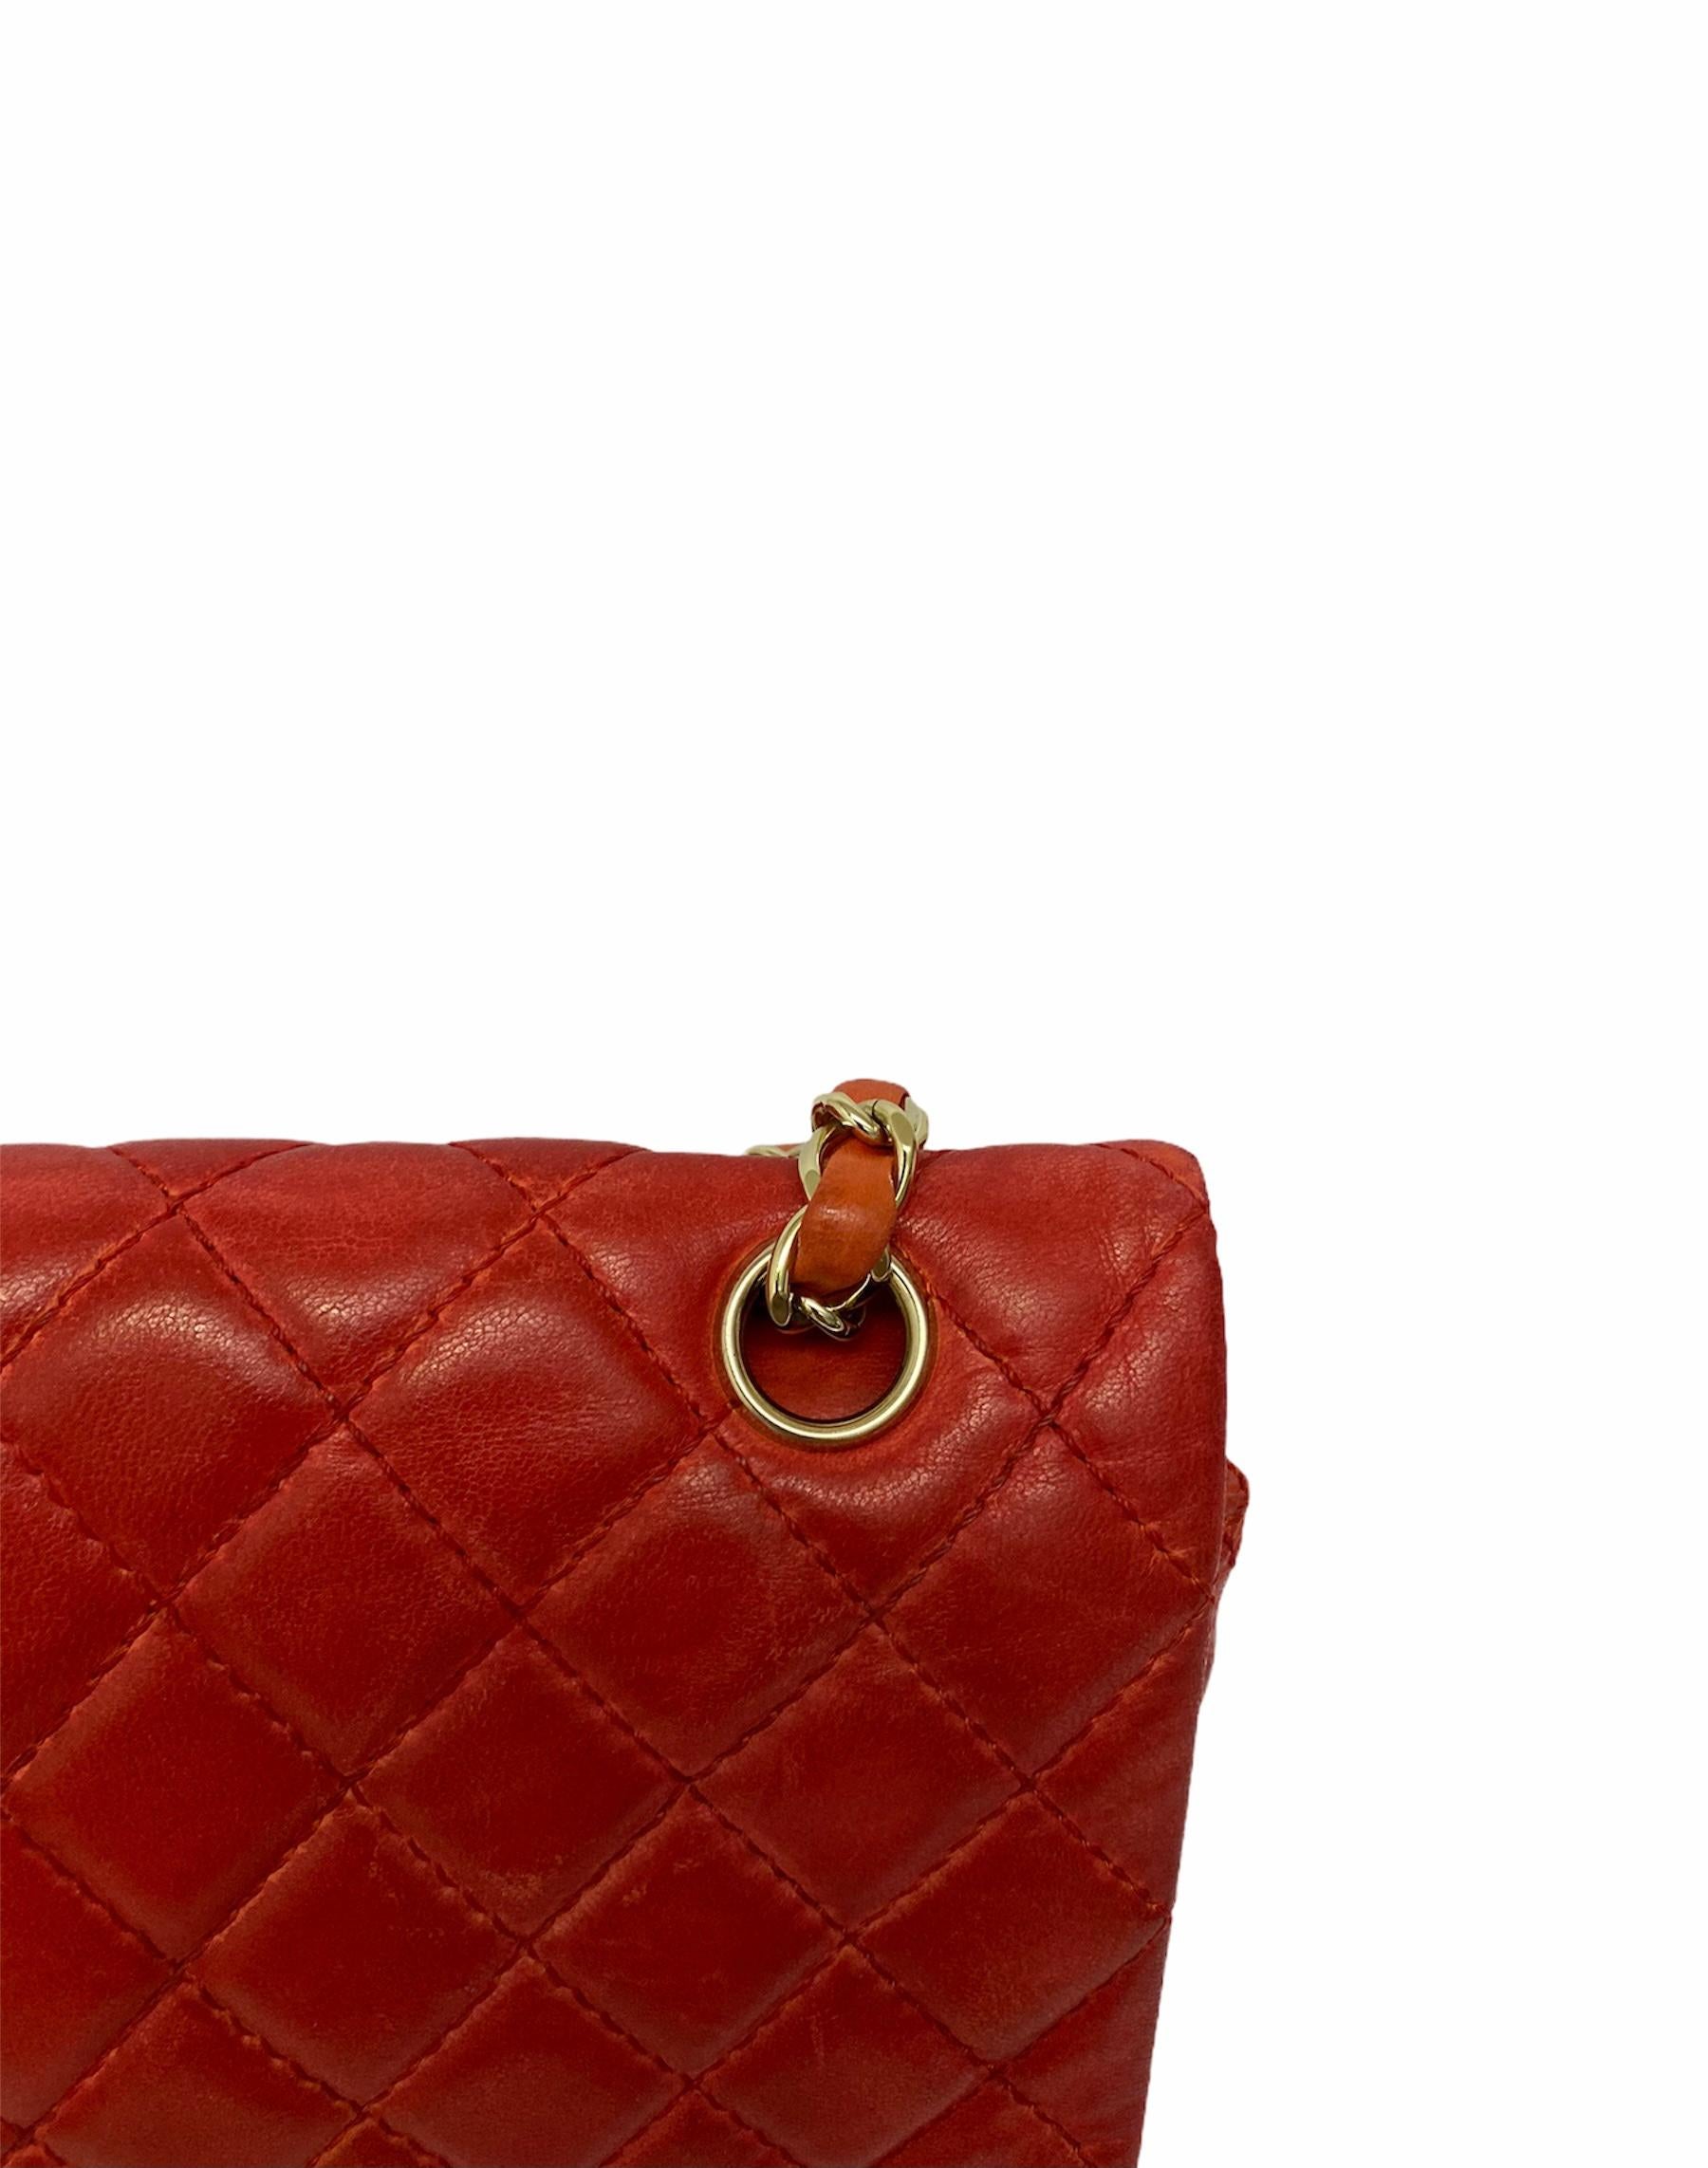 Chanel 2.55 Red Leather with Golden Hardware 5